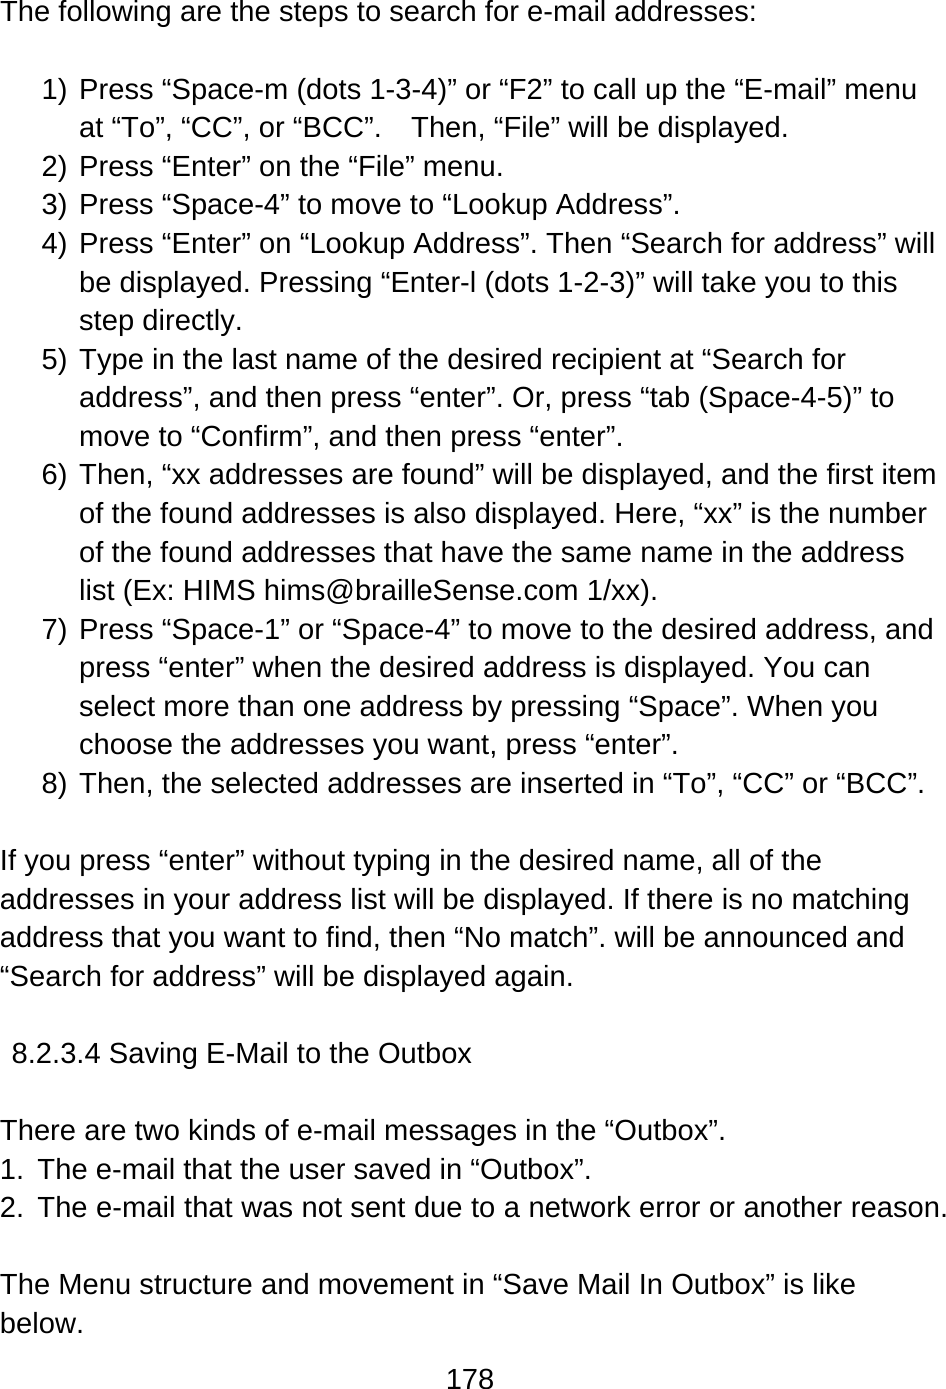 178   The following are the steps to search for e-mail addresses:  1) Press “Space-m (dots 1-3-4)” or “F2” to call up the “E-mail” menu at “To”, “CC”, or “BCC”.    Then, “File” will be displayed. 2) Press “Enter” on the “File” menu. 3) Press “Space-4” to move to “Lookup Address”. 4) Press “Enter” on “Lookup Address”. Then “Search for address” will be displayed. Pressing “Enter-l (dots 1-2-3)” will take you to this step directly. 5) Type in the last name of the desired recipient at “Search for address”, and then press “enter”. Or, press “tab (Space-4-5)” to move to “Confirm”, and then press “enter”. 6) Then, “xx addresses are found” will be displayed, and the first item of the found addresses is also displayed. Here, “xx” is the number of the found addresses that have the same name in the address list (Ex: HIMS hims@brailleSense.com 1/xx). 7) Press “Space-1” or “Space-4” to move to the desired address, and press “enter” when the desired address is displayed. You can select more than one address by pressing “Space”. When you   choose the addresses you want, press “enter”. 8) Then, the selected addresses are inserted in “To”, “CC” or “BCC”.    If you press “enter” without typing in the desired name, all of the addresses in your address list will be displayed. If there is no matching address that you want to find, then “No match”. will be announced and “Search for address” will be displayed again.  8.2.3.4 Saving E-Mail to the Outbox  There are two kinds of e-mail messages in the “Outbox”. 1.  The e-mail that the user saved in “Outbox”. 2.  The e-mail that was not sent due to a network error or another reason.  The Menu structure and movement in “Save Mail In Outbox” is like below. 